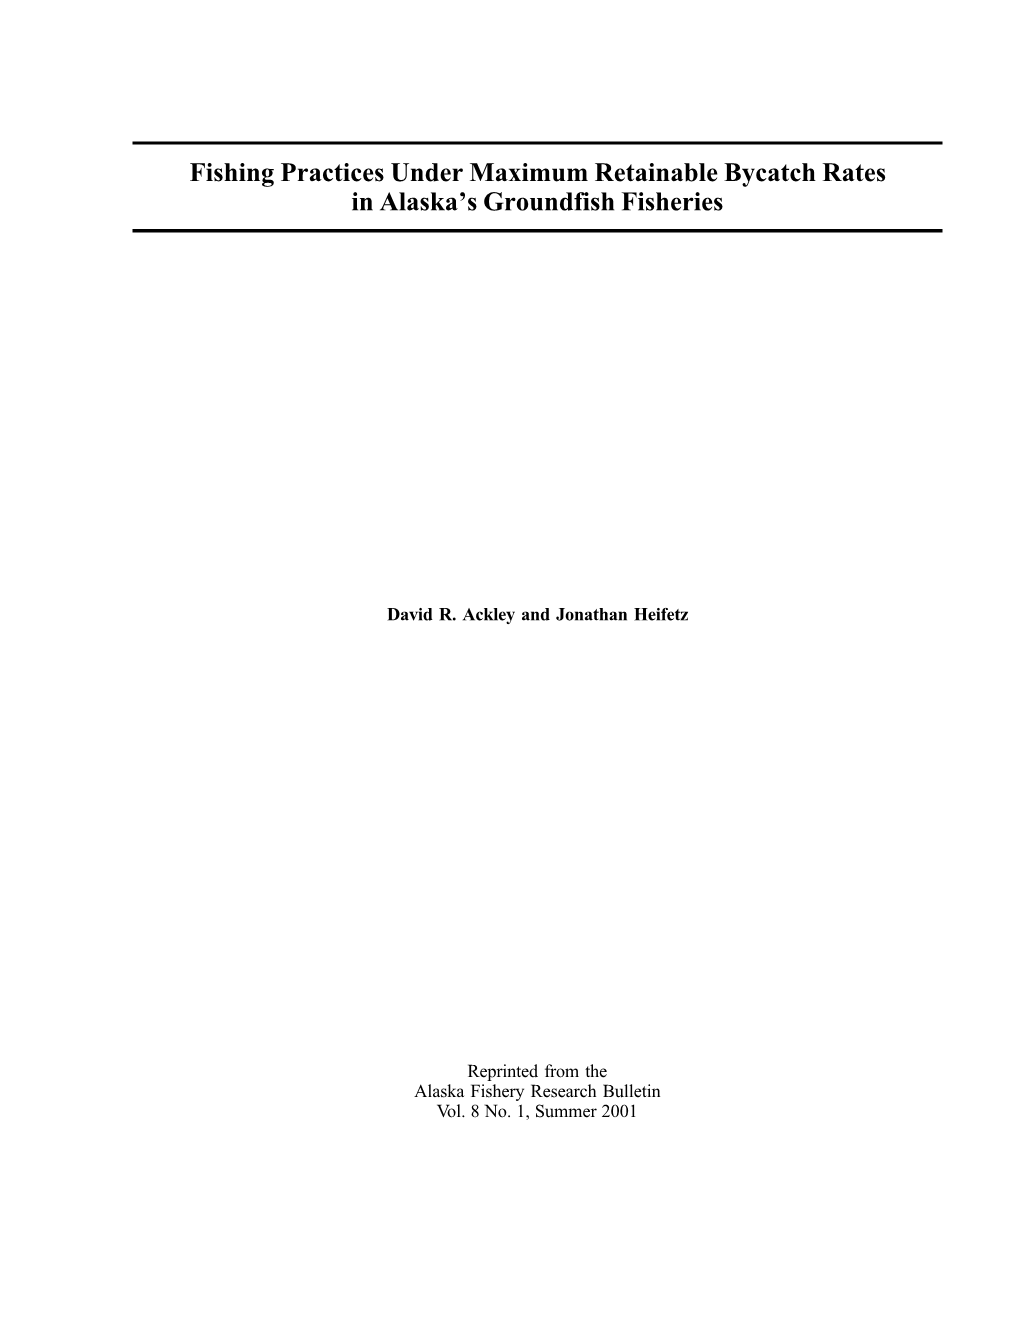 Fishing Practices Under Maximum Retainable Bycatch Rates in Alaska's Groundfish Fishery